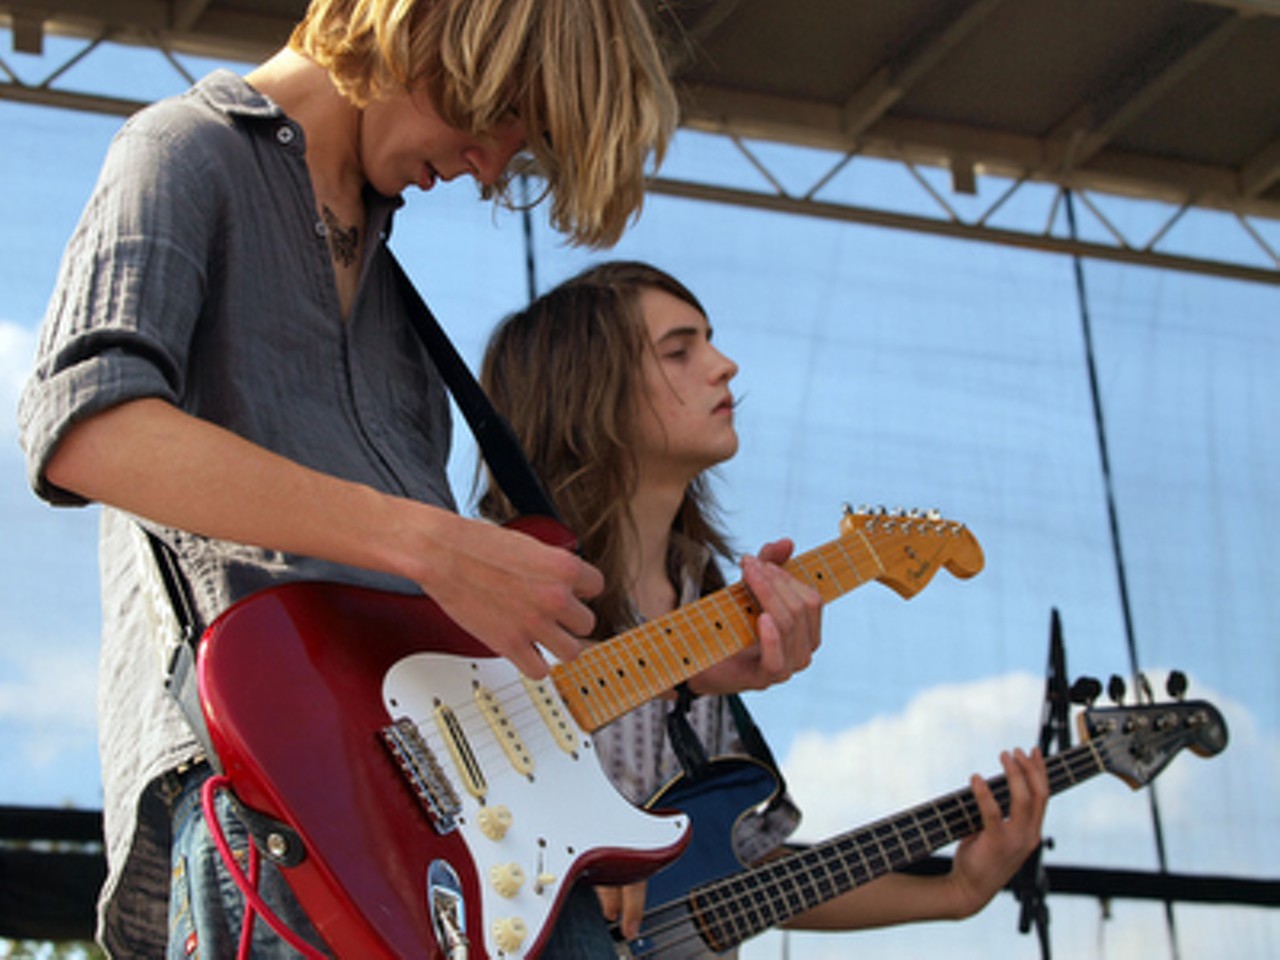 The Paul Green School of Rock All-Stars perform Friday at ACL.